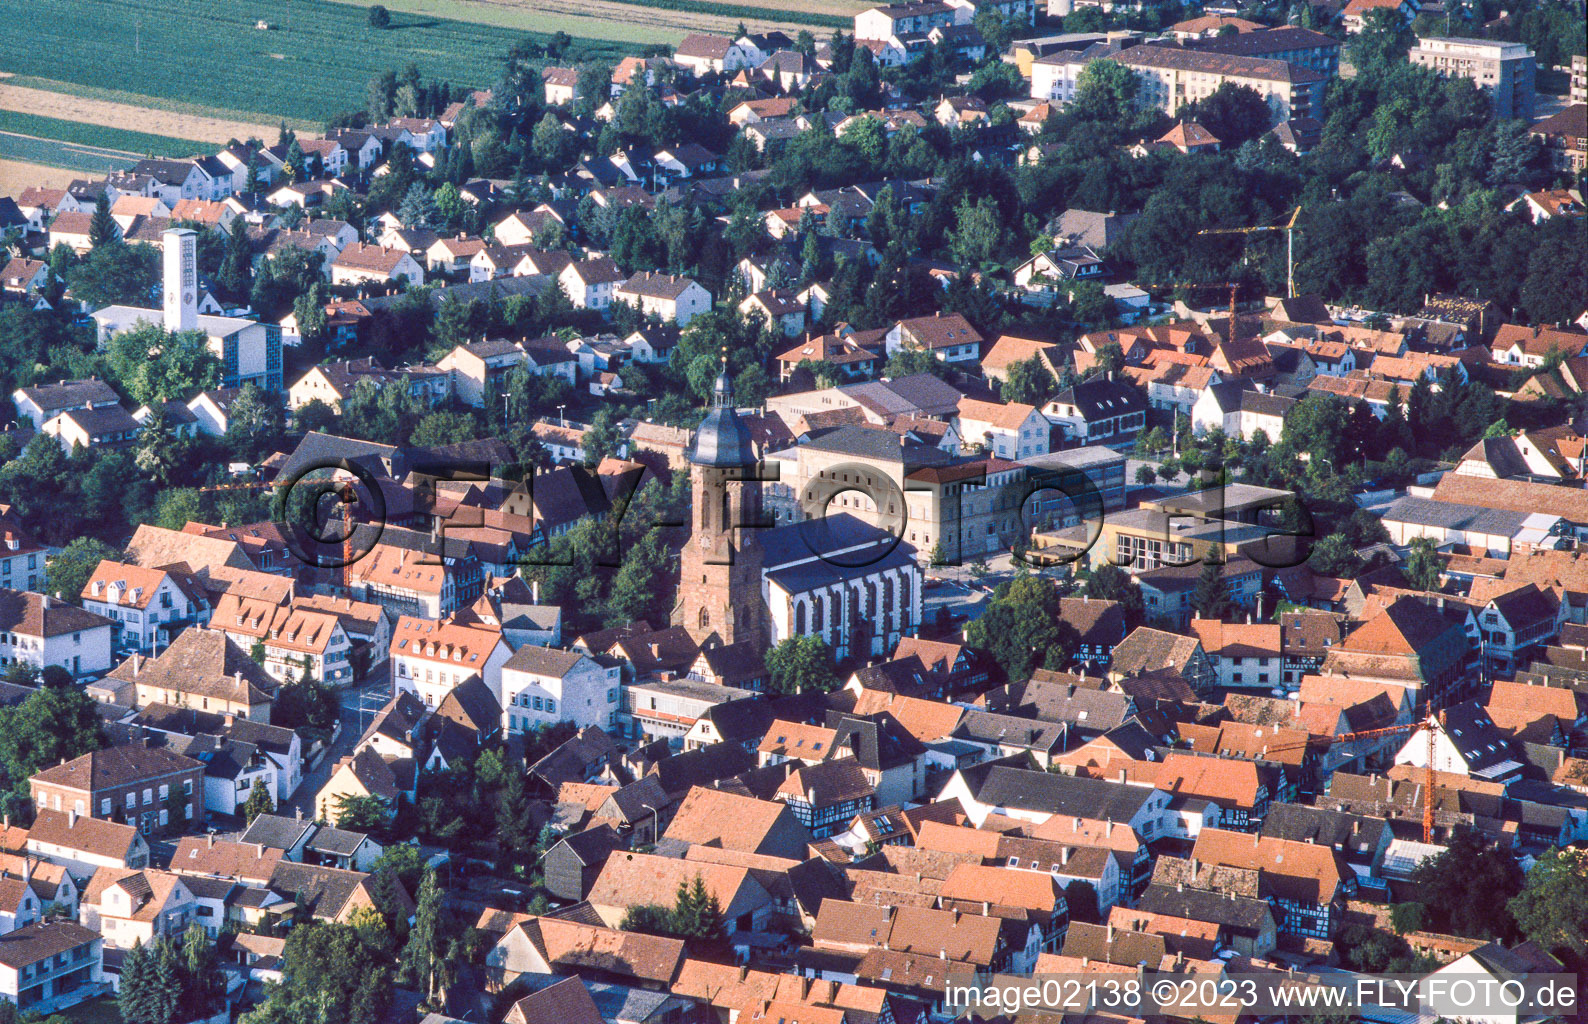 Aerial view of St. George's Church from the balloon in Kandel in the state Rhineland-Palatinate, Germany